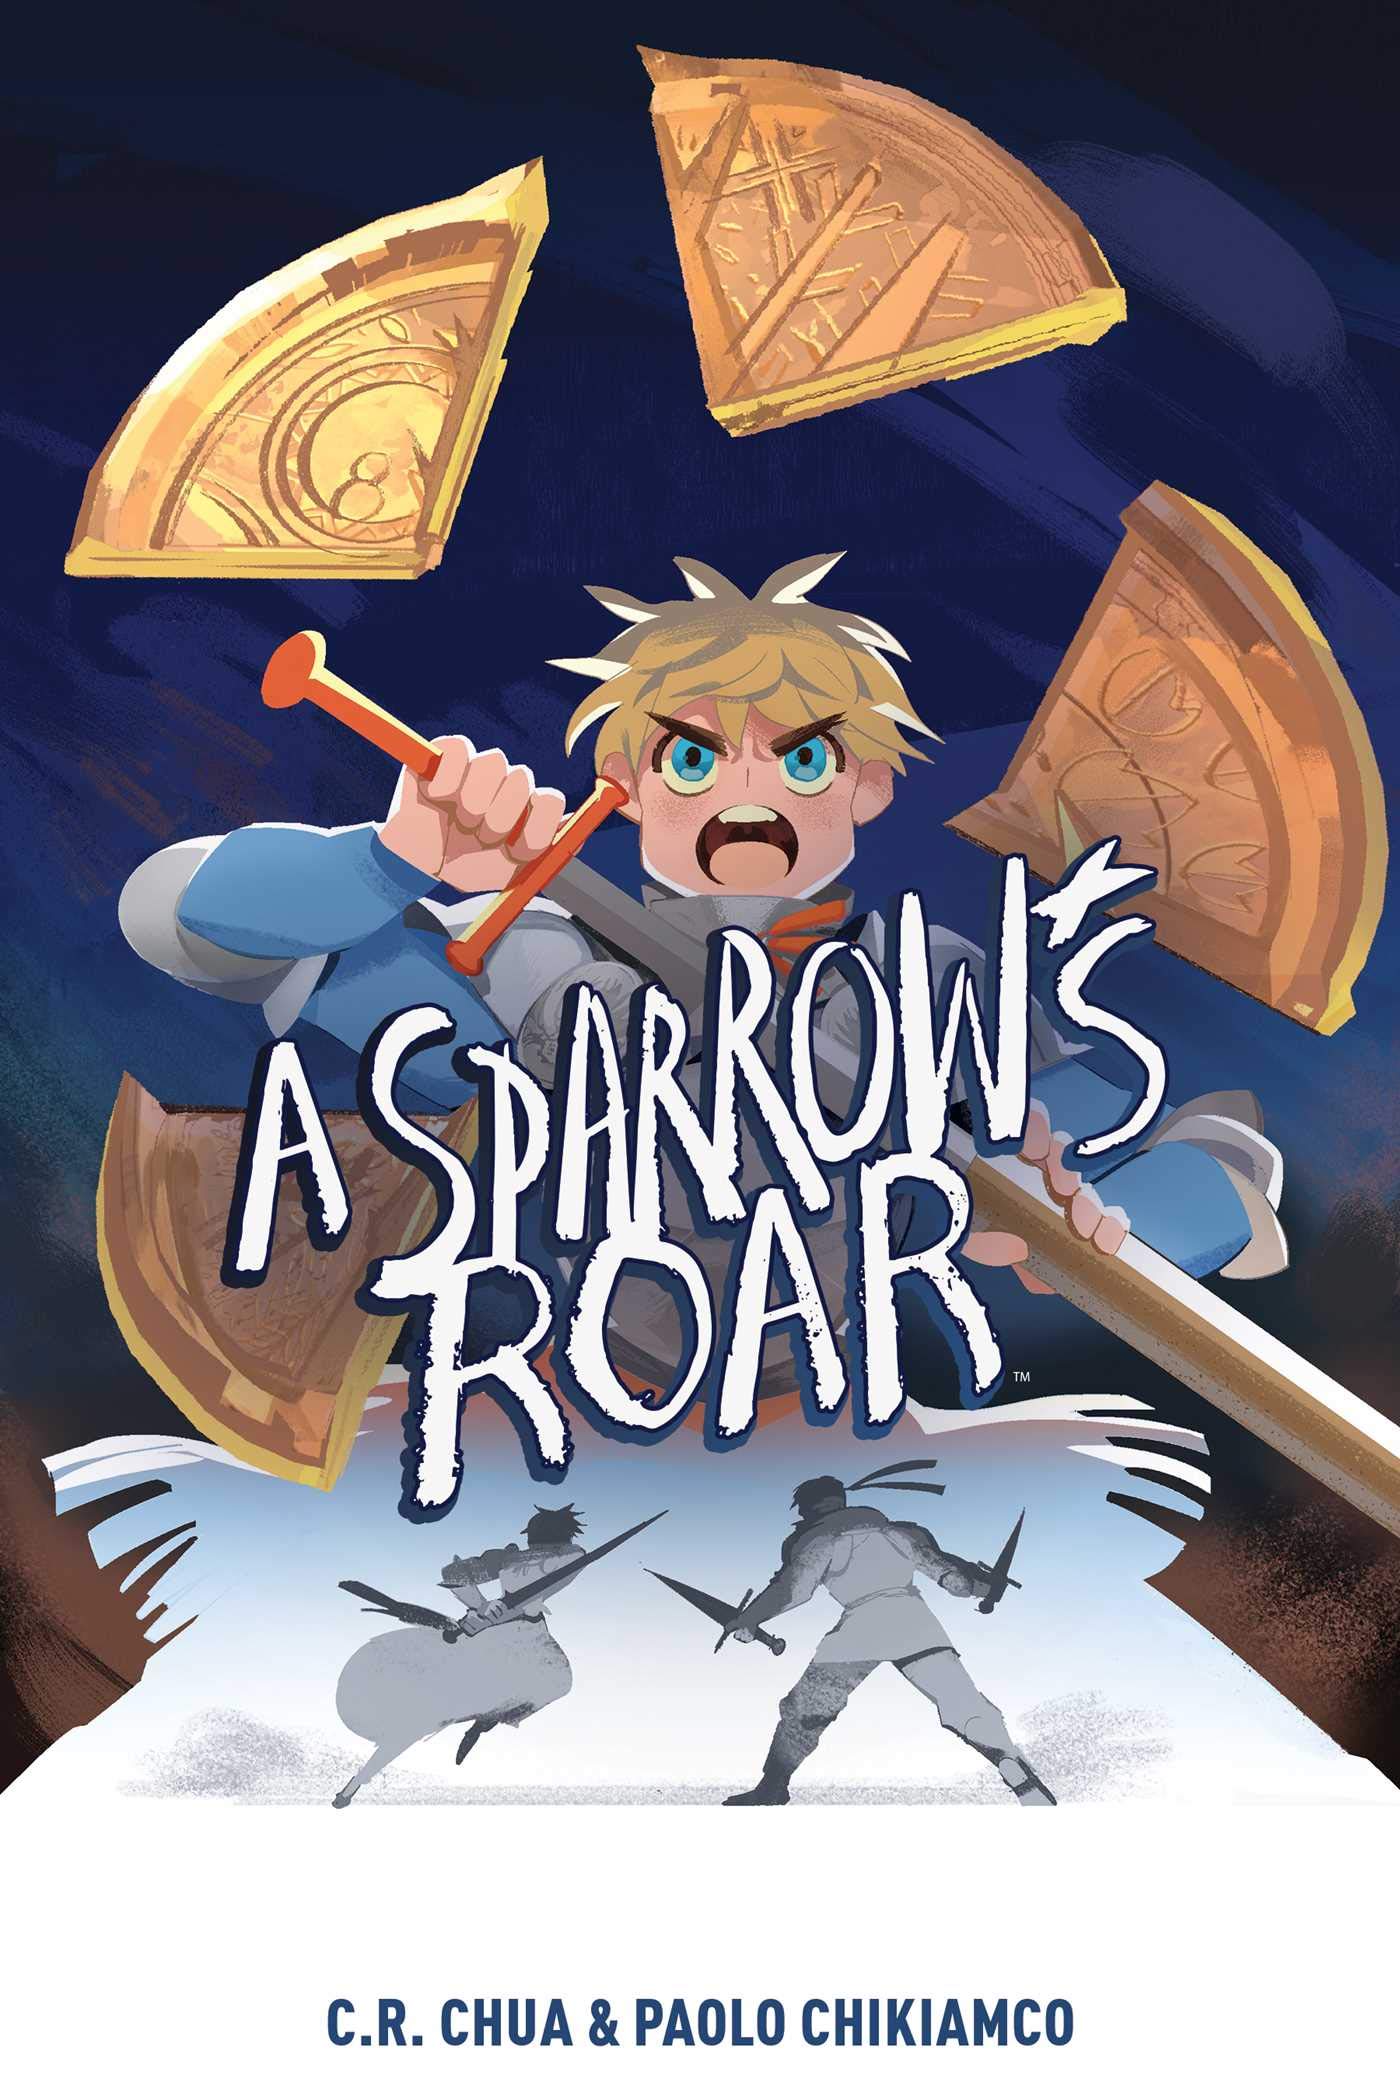 PH comic creators C.R. Chua and Paolo Chikiamco’s ‘A Sparrow’s Roar’ gets int’l release